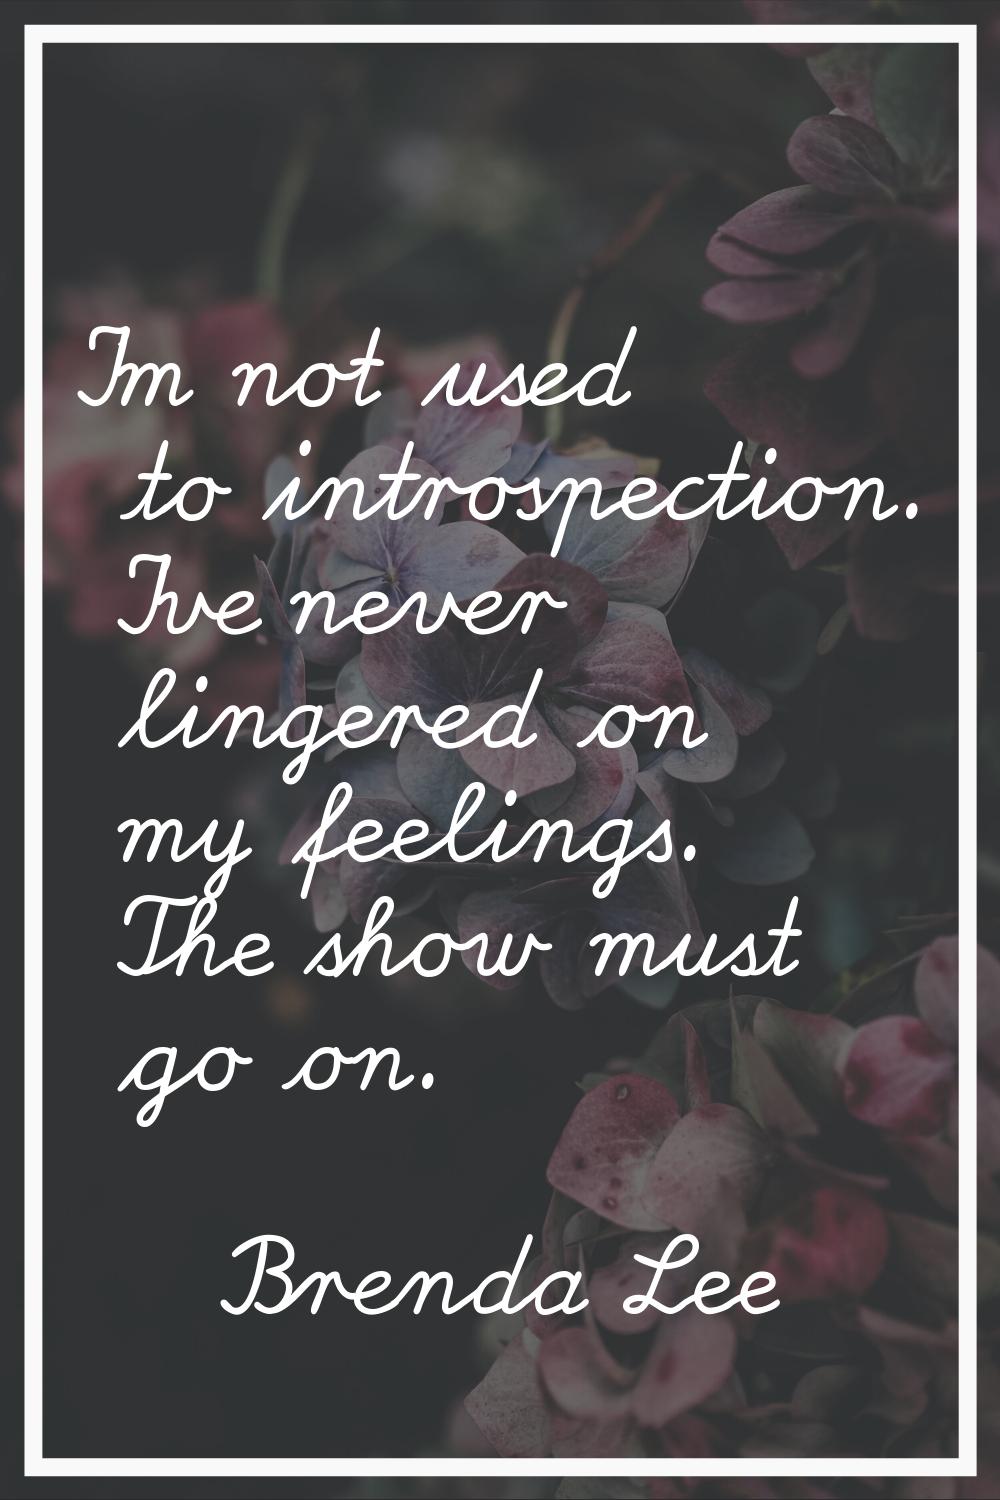 I'm not used to introspection. I've never lingered on my feelings. The show must go on.